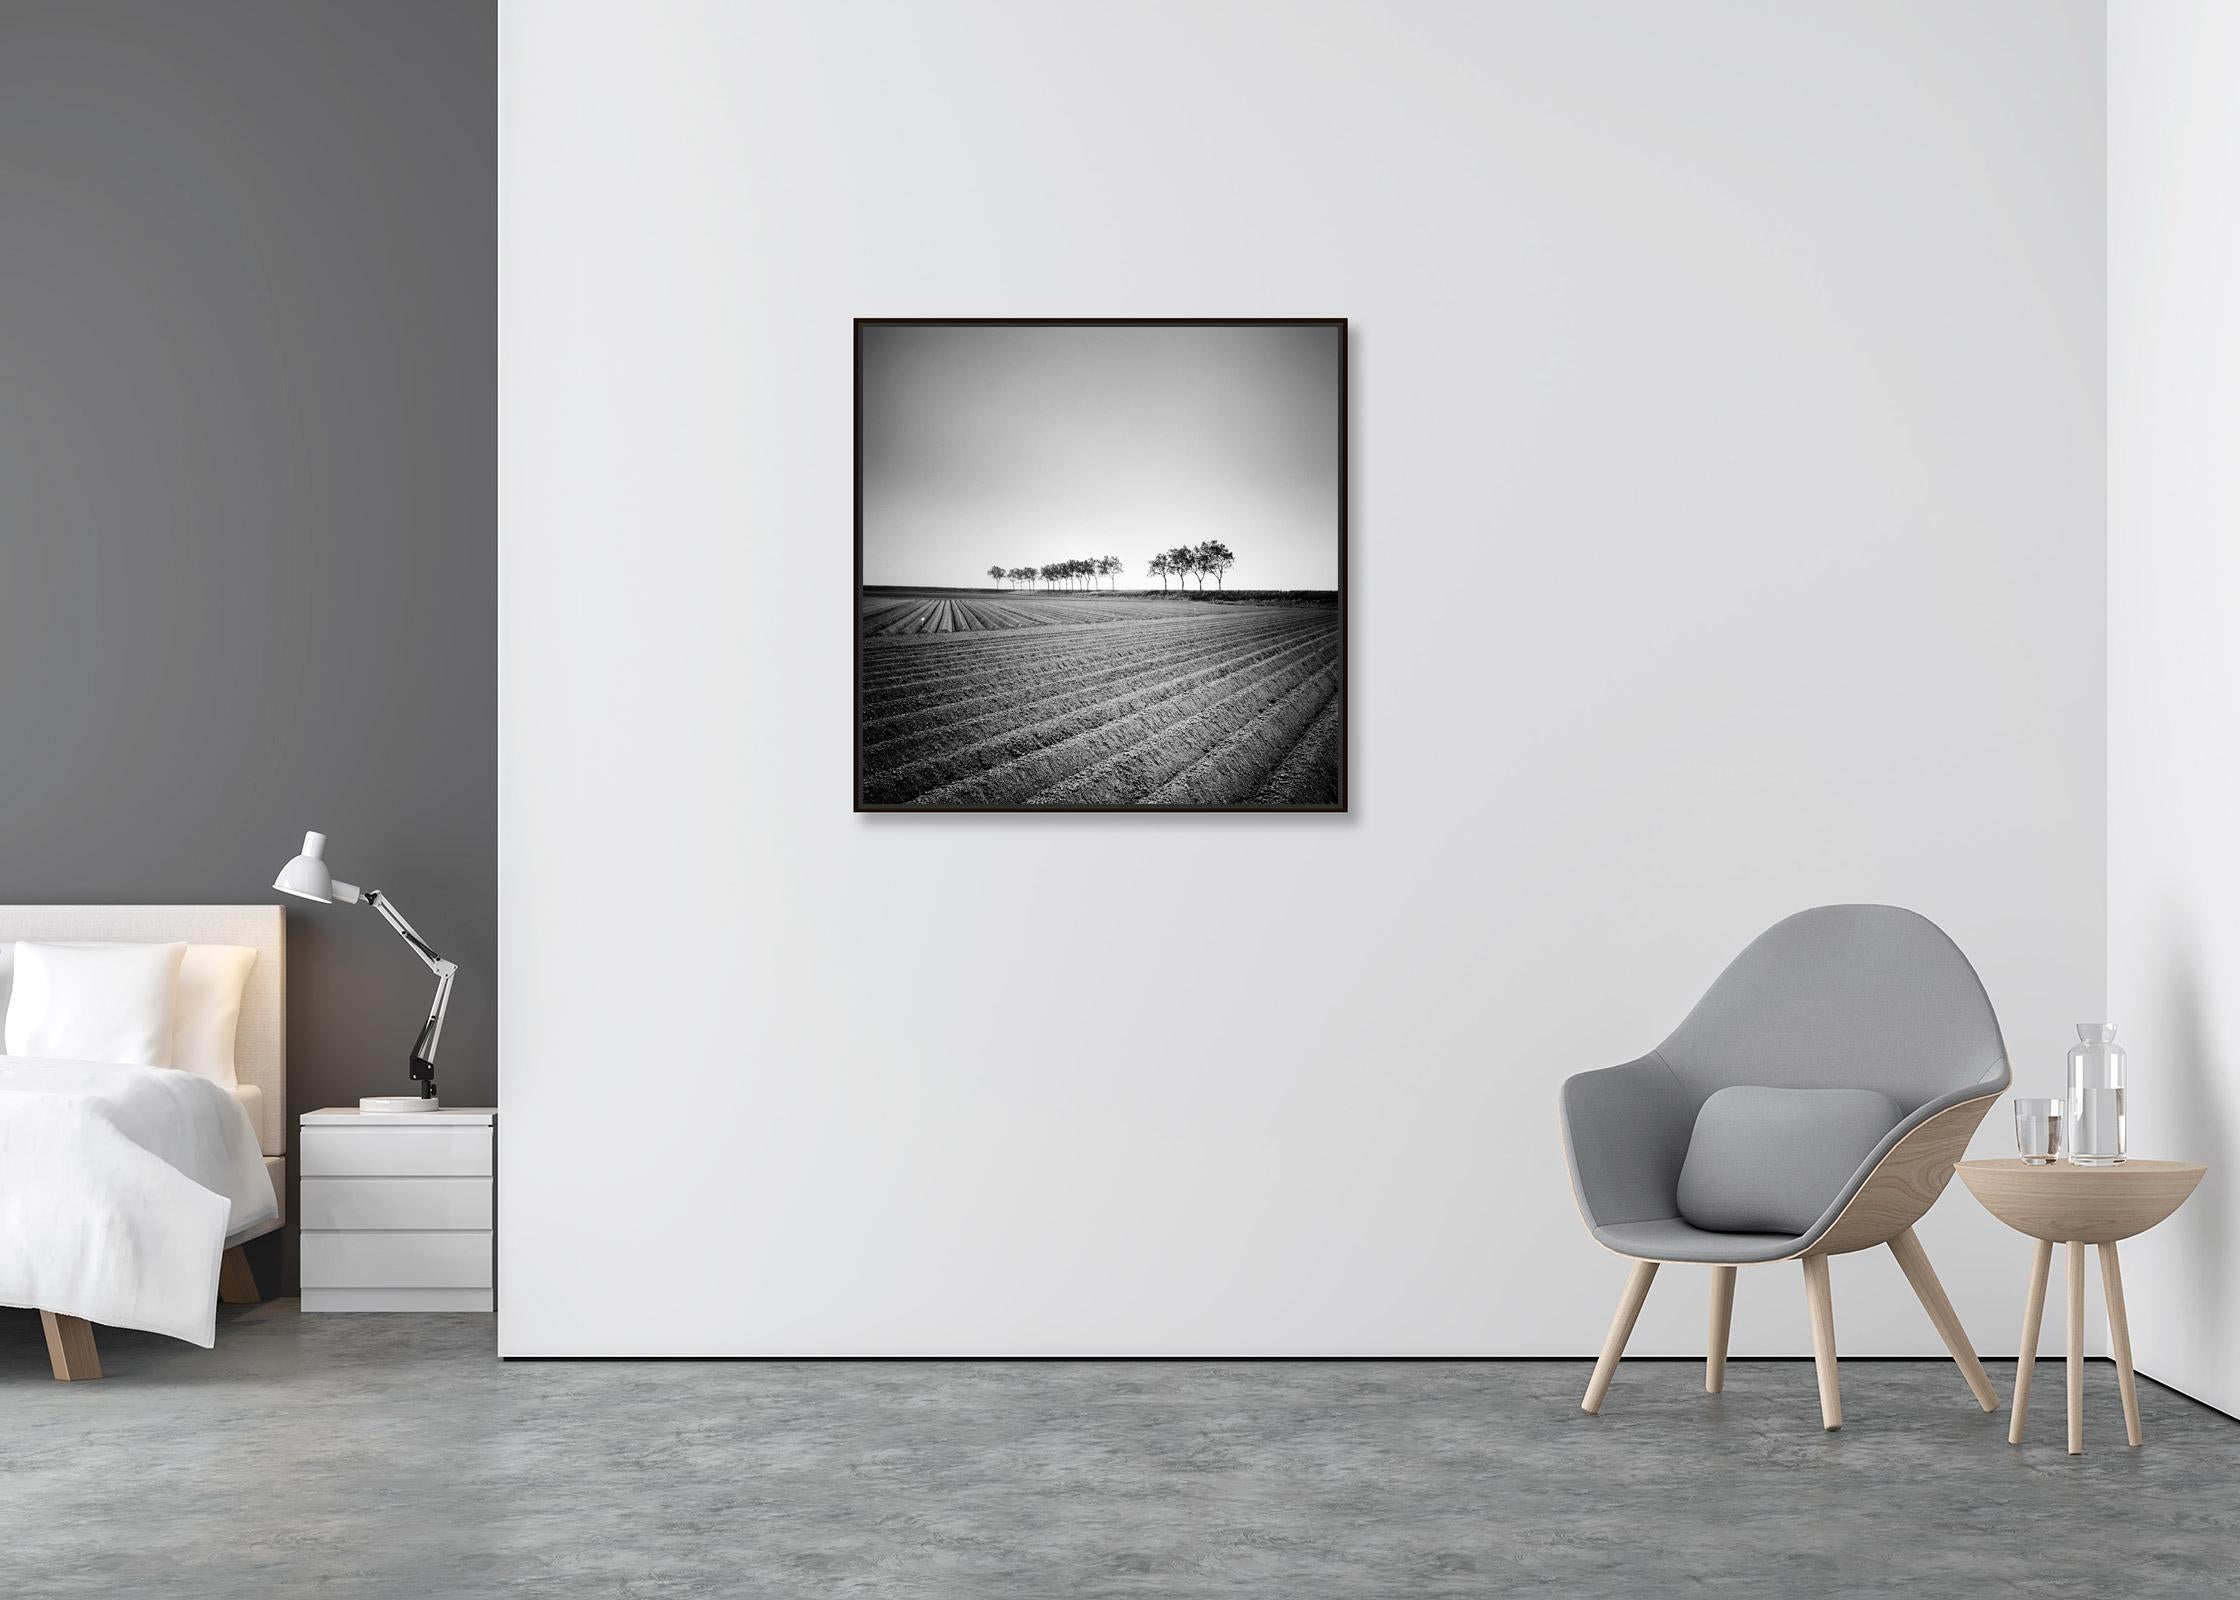 Asparagus Field, Tree Avenue, Netherlands, Black and White landscape photography - Contemporary Photograph by Gerald Berghammer